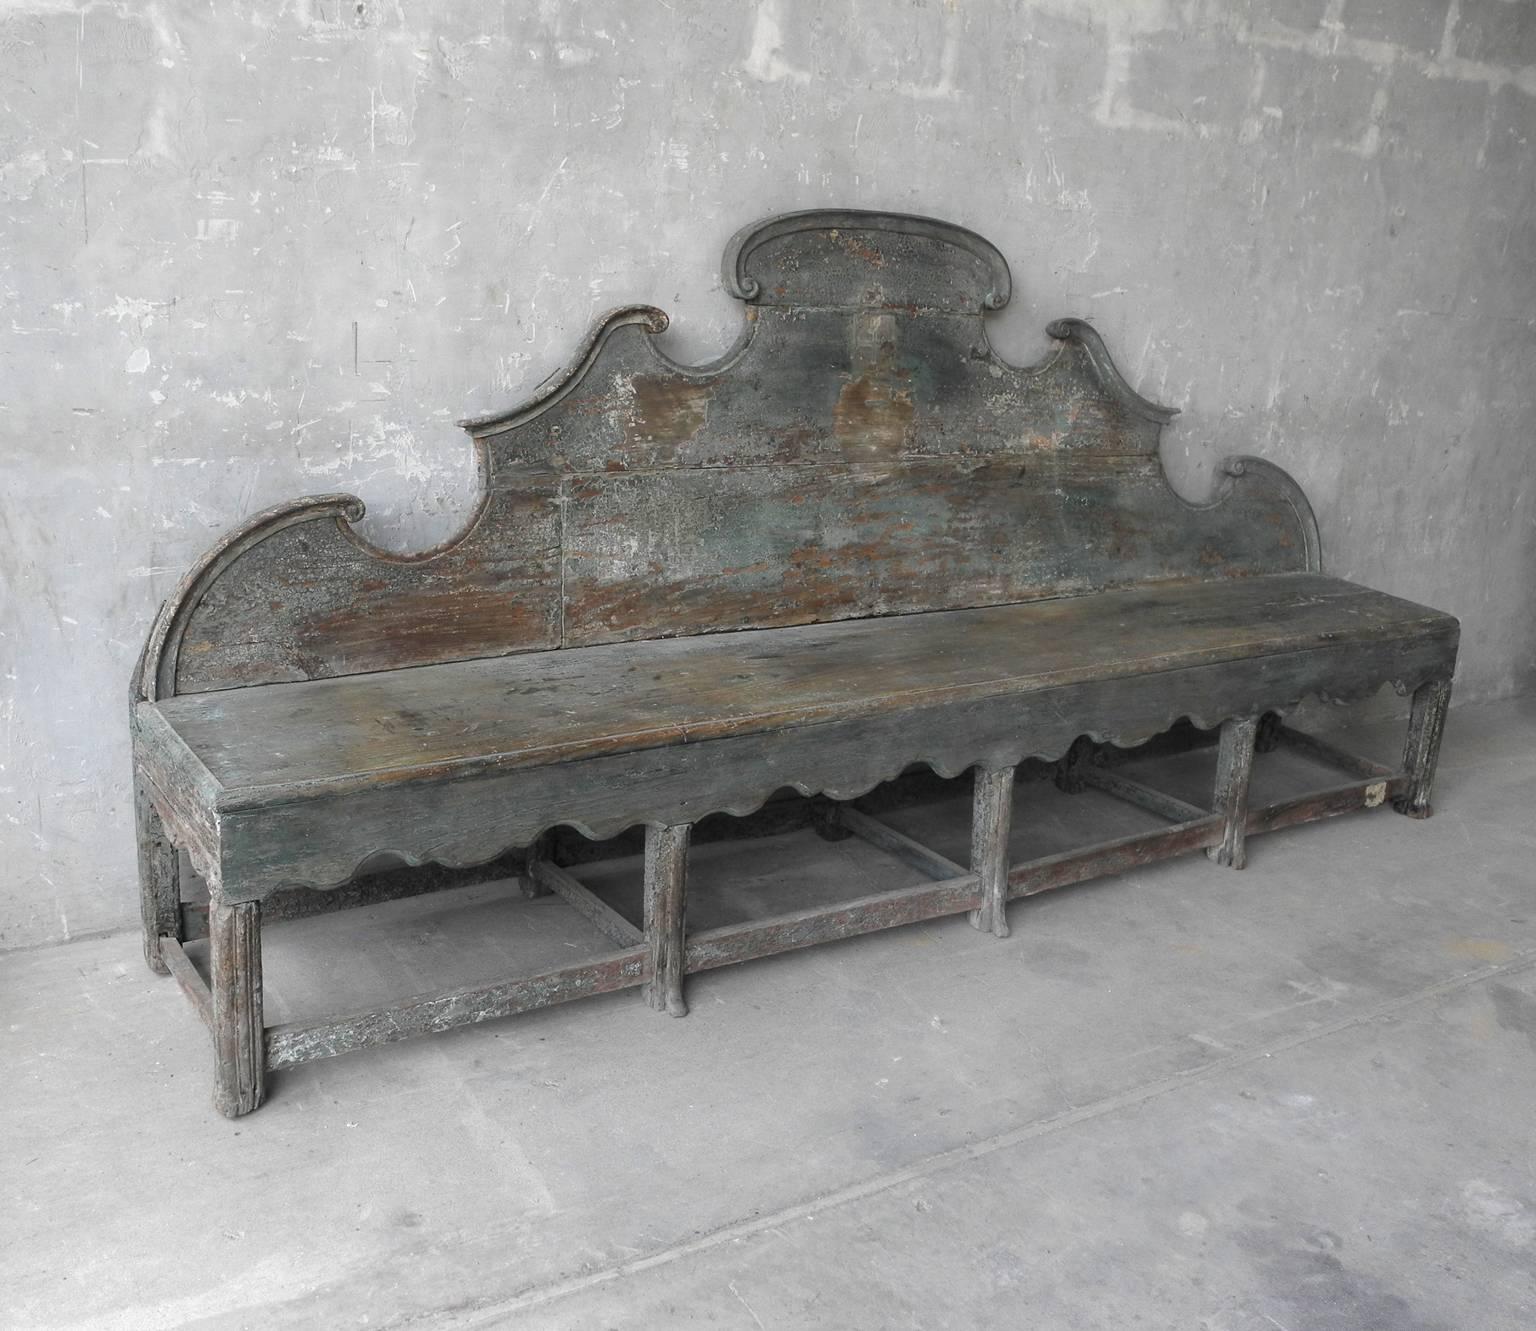 This is an intricate and lovely 18th century Italian bench from a convent near the Swiss border. The bench boasts great length at almost 107 inches wide. It has a beautiful back panel that has lovely detail, as well as carvings under the seat. The